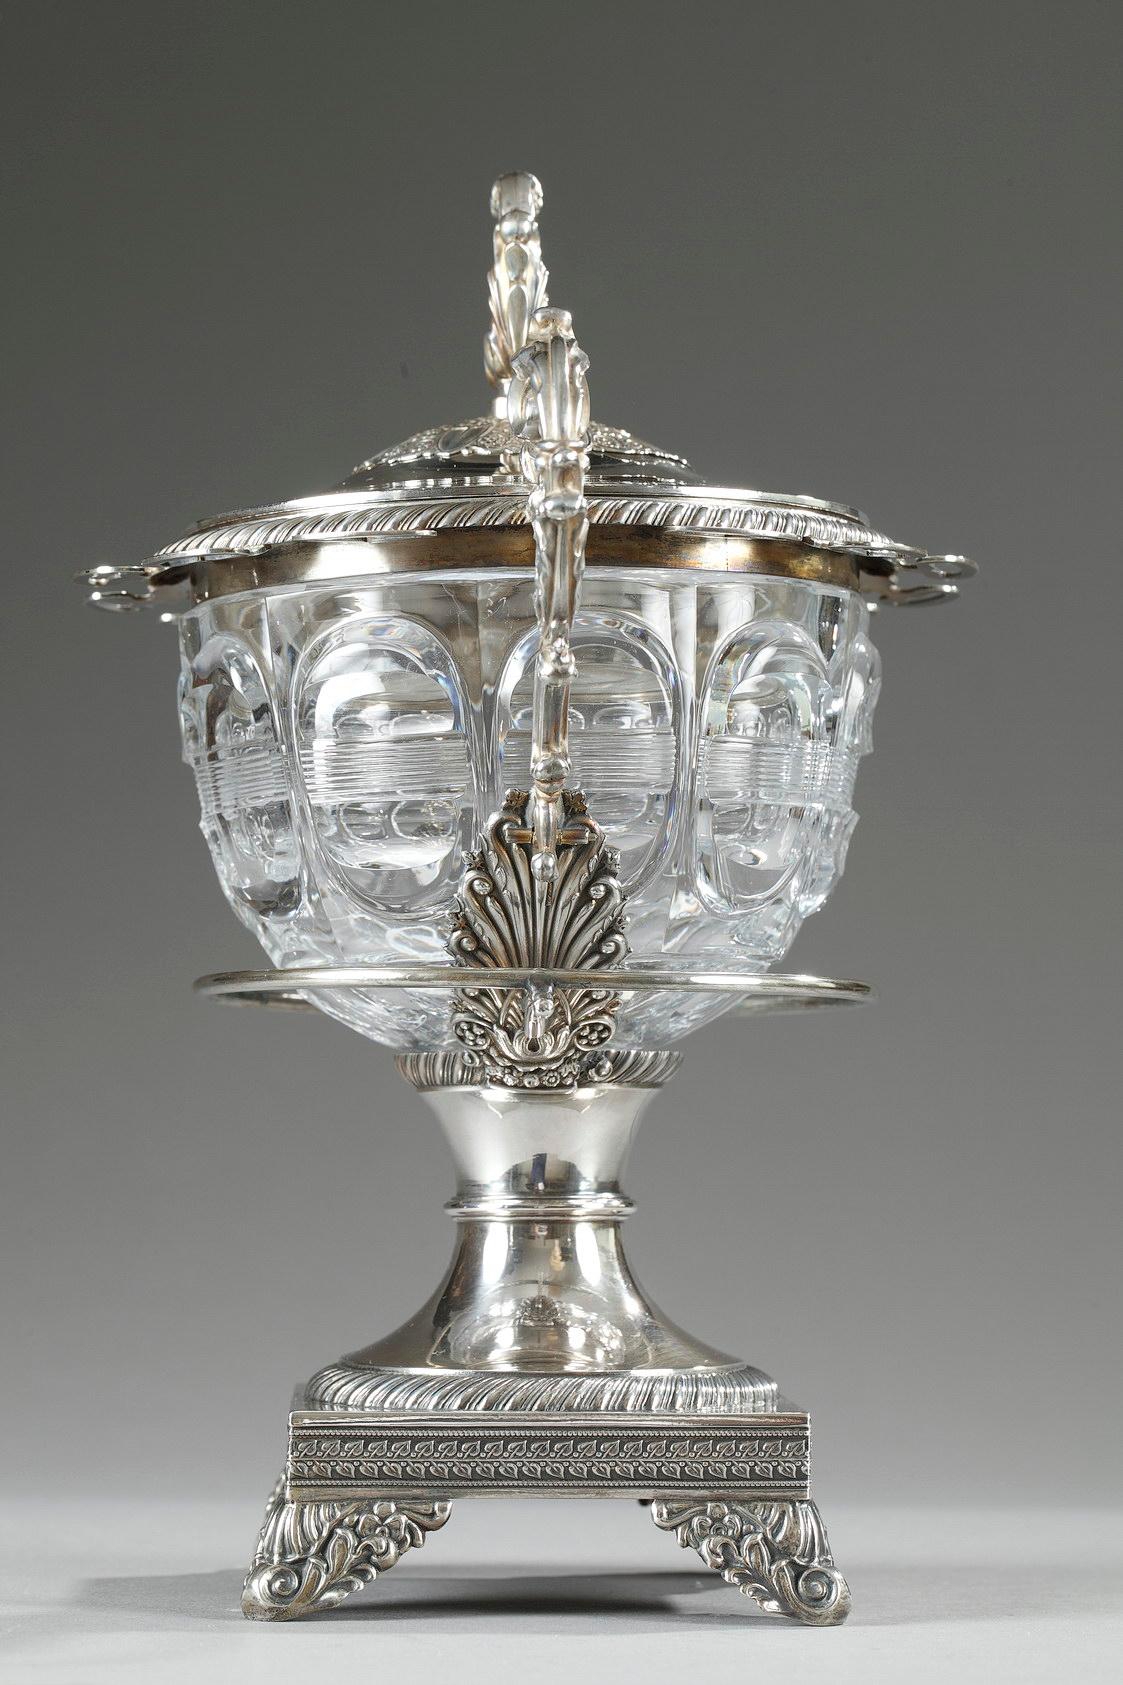 Vermeil 19th Century Large Silver and Cut-Crystal Confiturier, with 12 Spoons